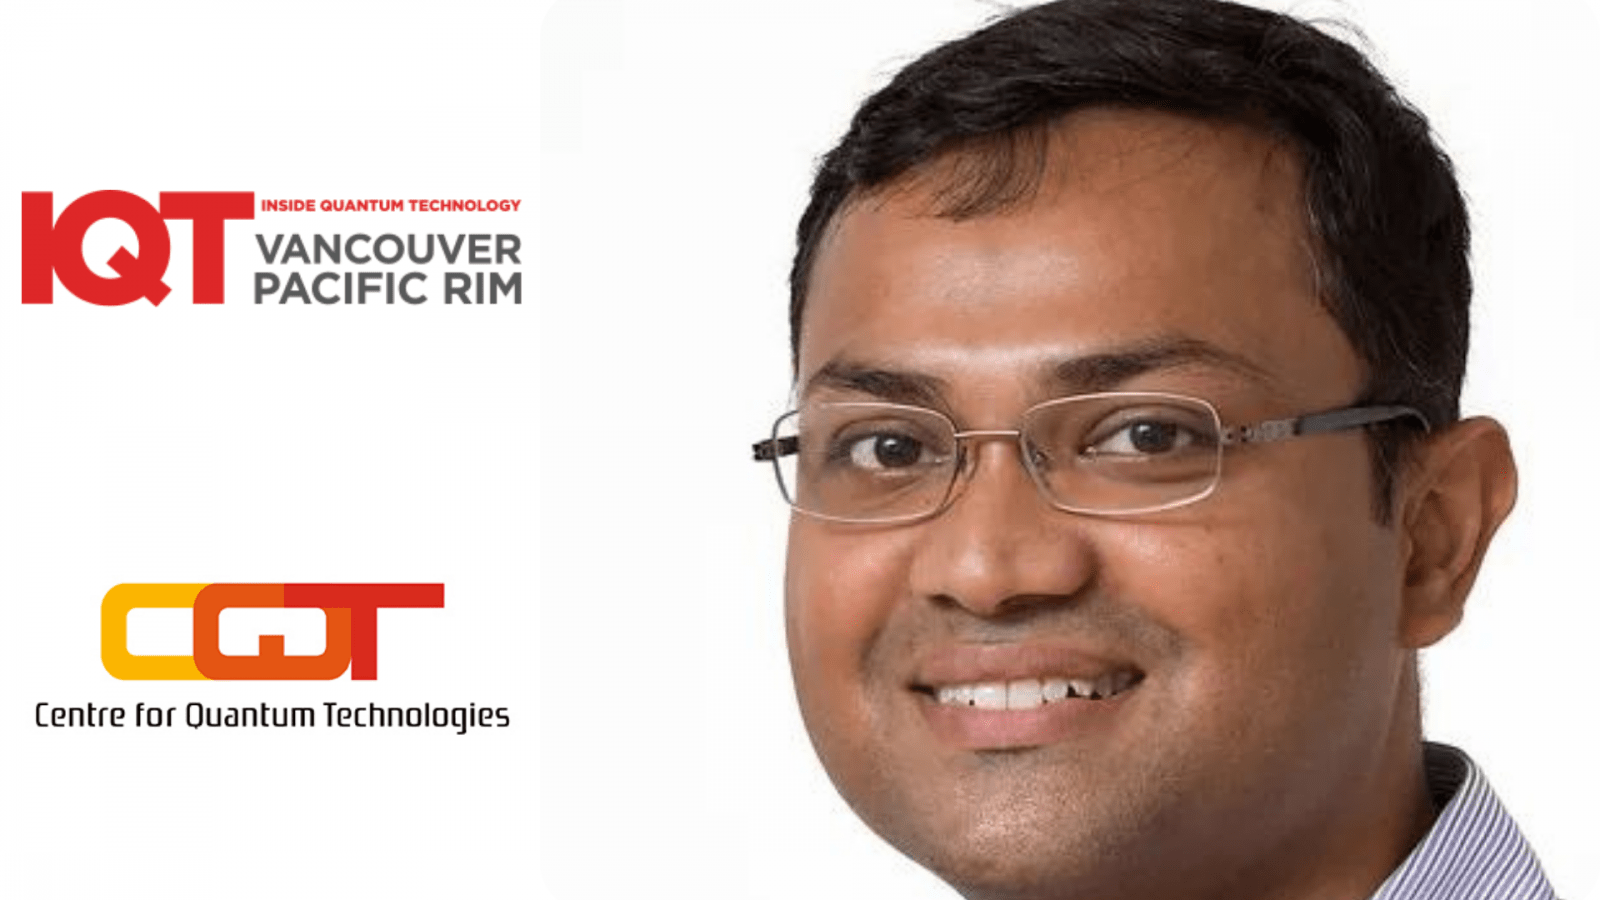 Manas Mukherjee, the Director of National Quantum Fabless Foundry and a PI at the Centre for Quantum Technologies is an IQT Vancouver/Pacific Rim 2024 Speaker